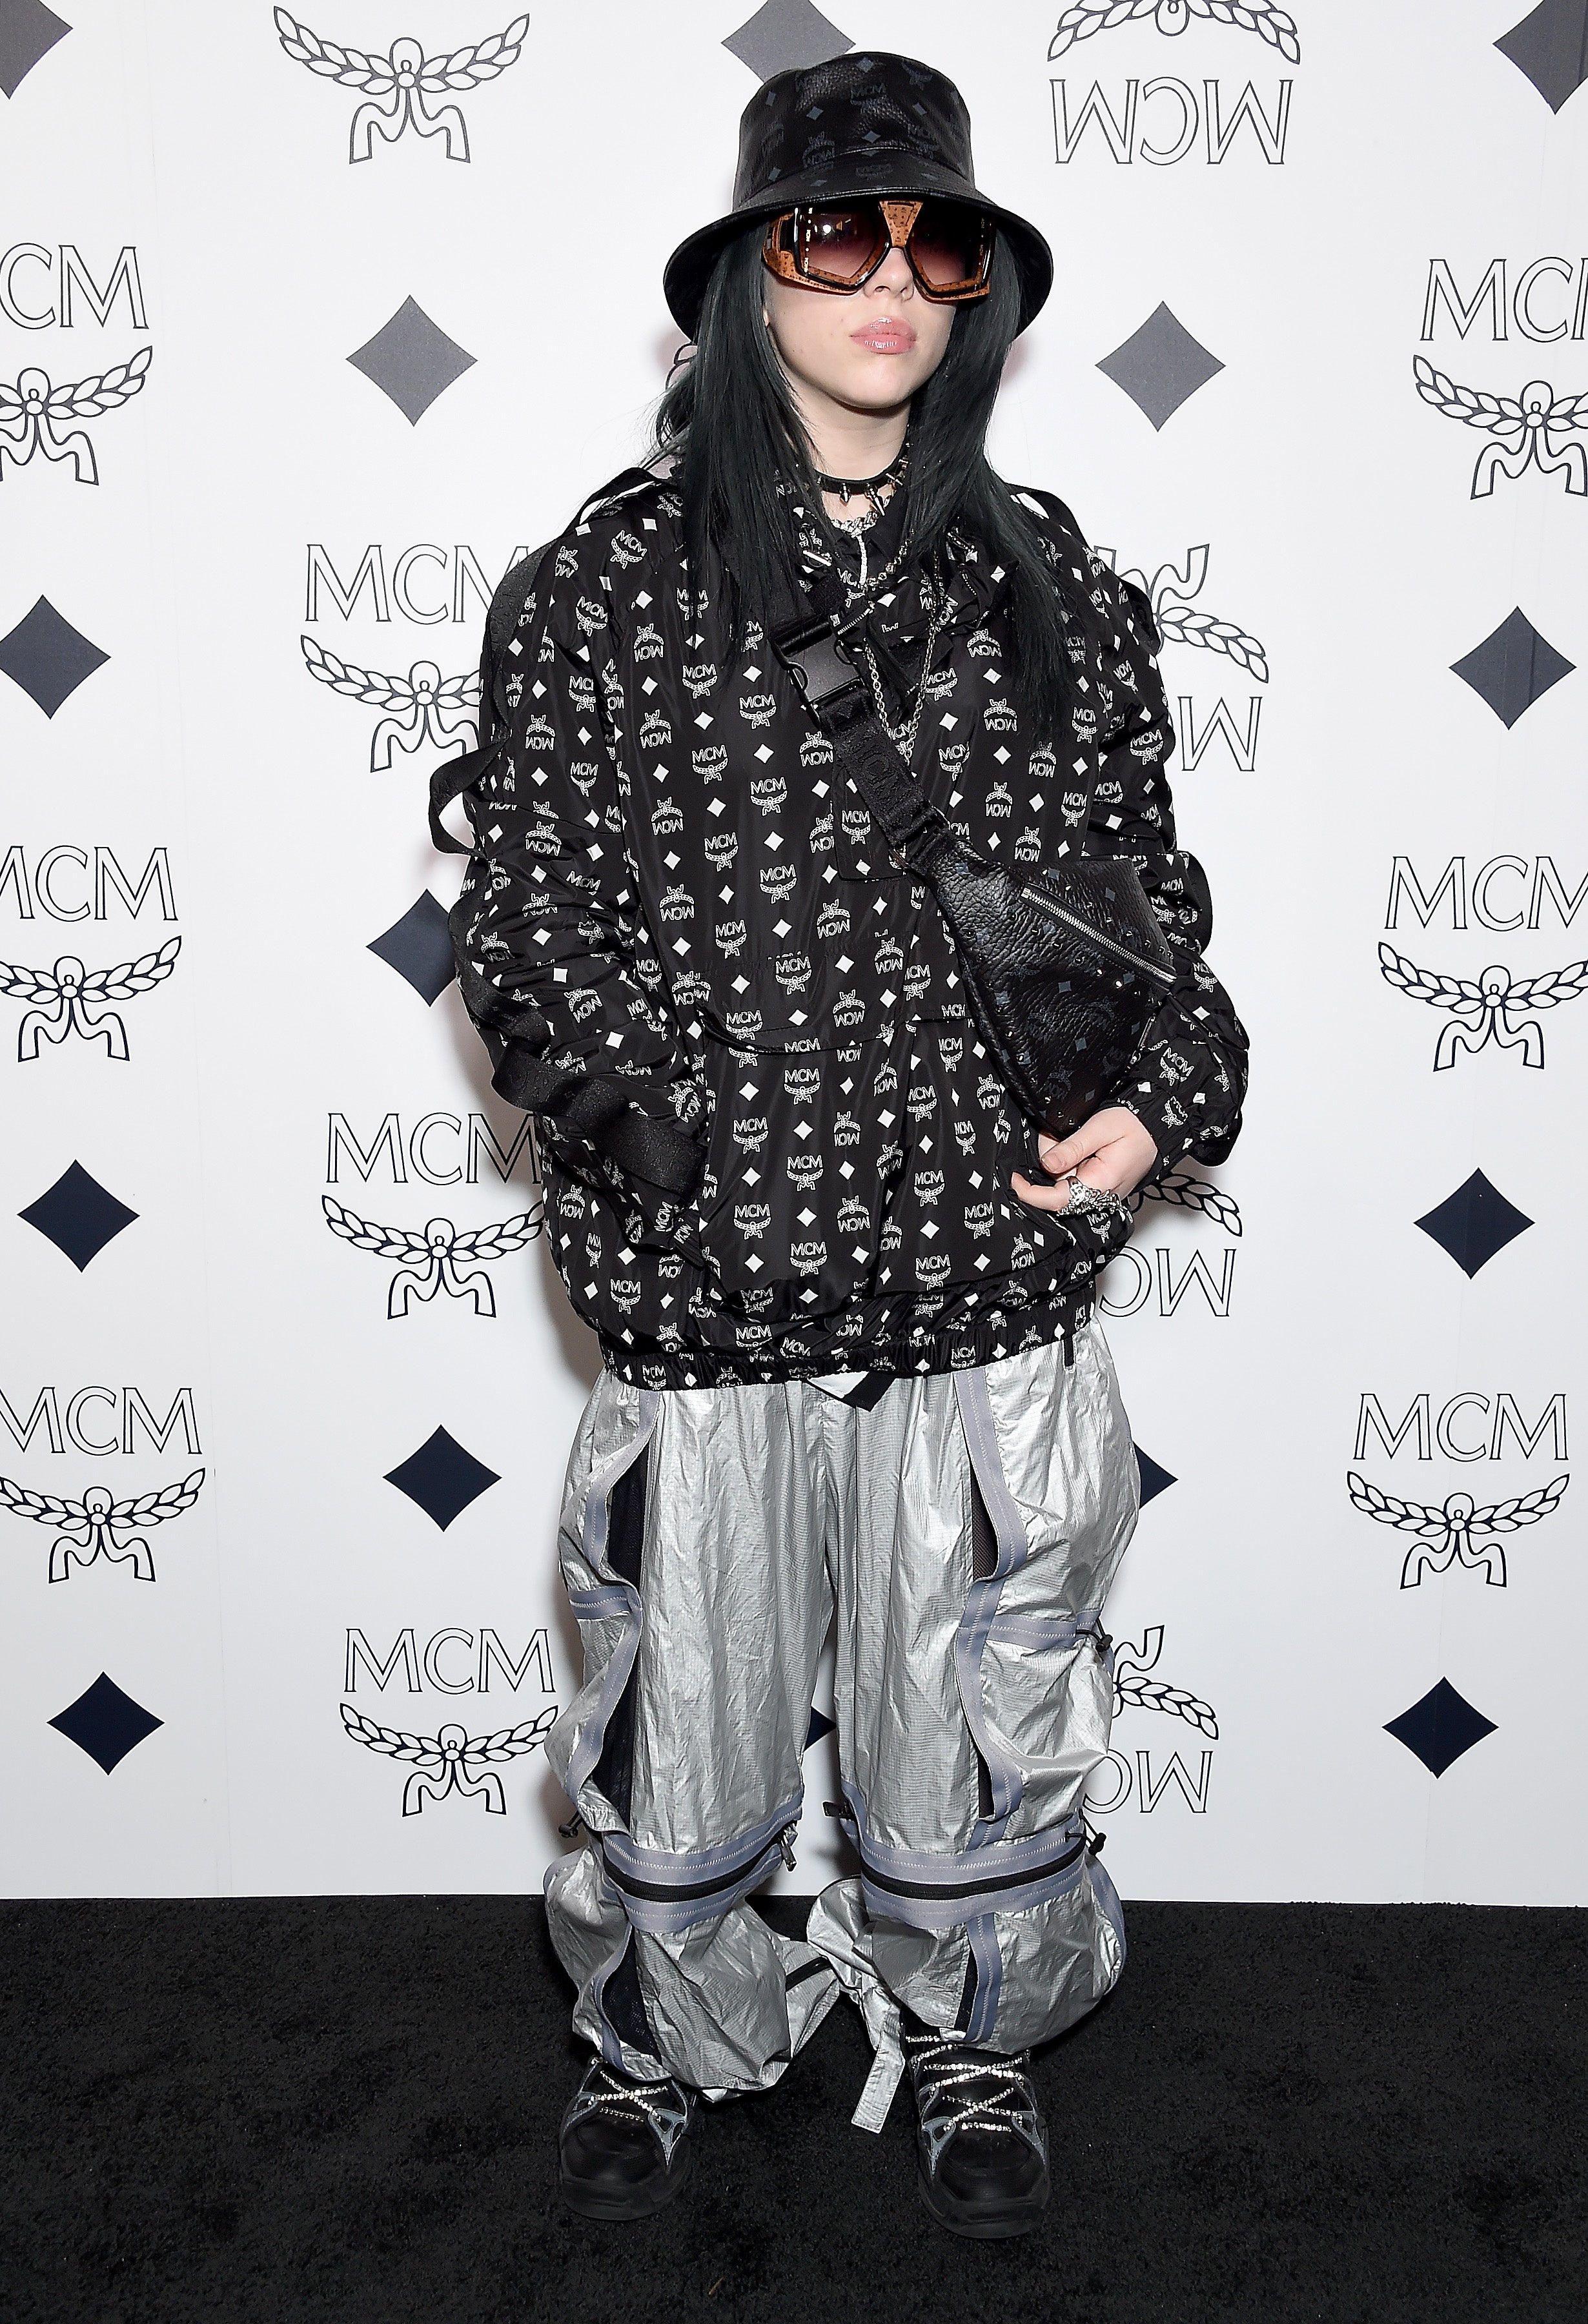 Billie Eilish Decked Out in Louis Vuitton, What the Fashion